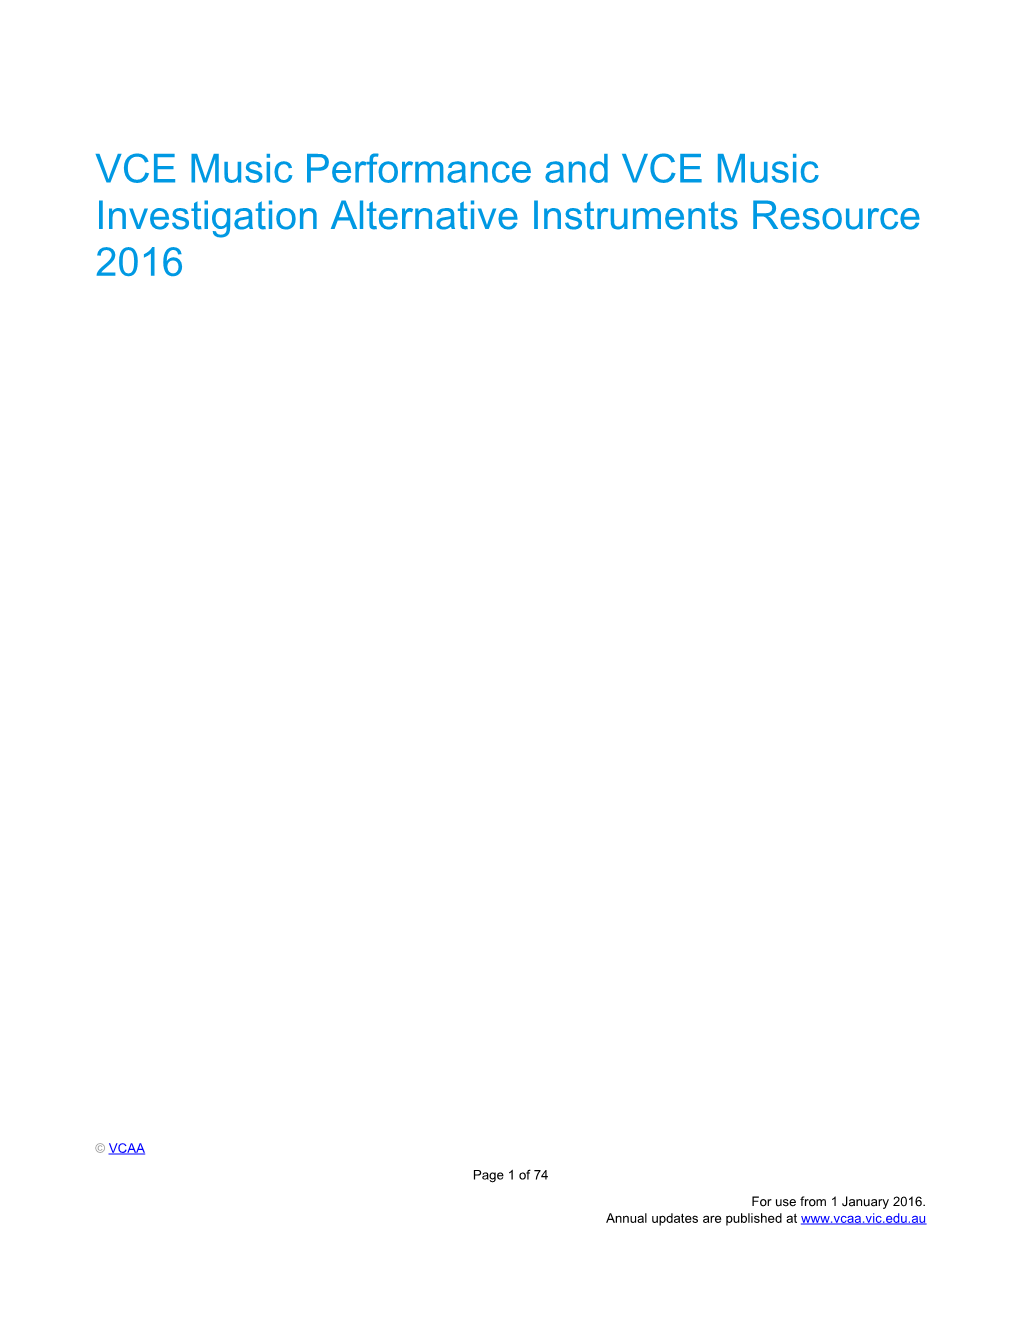 VCE Music Performance and VCE Music Investigation Alternative Instruments Resource 2016